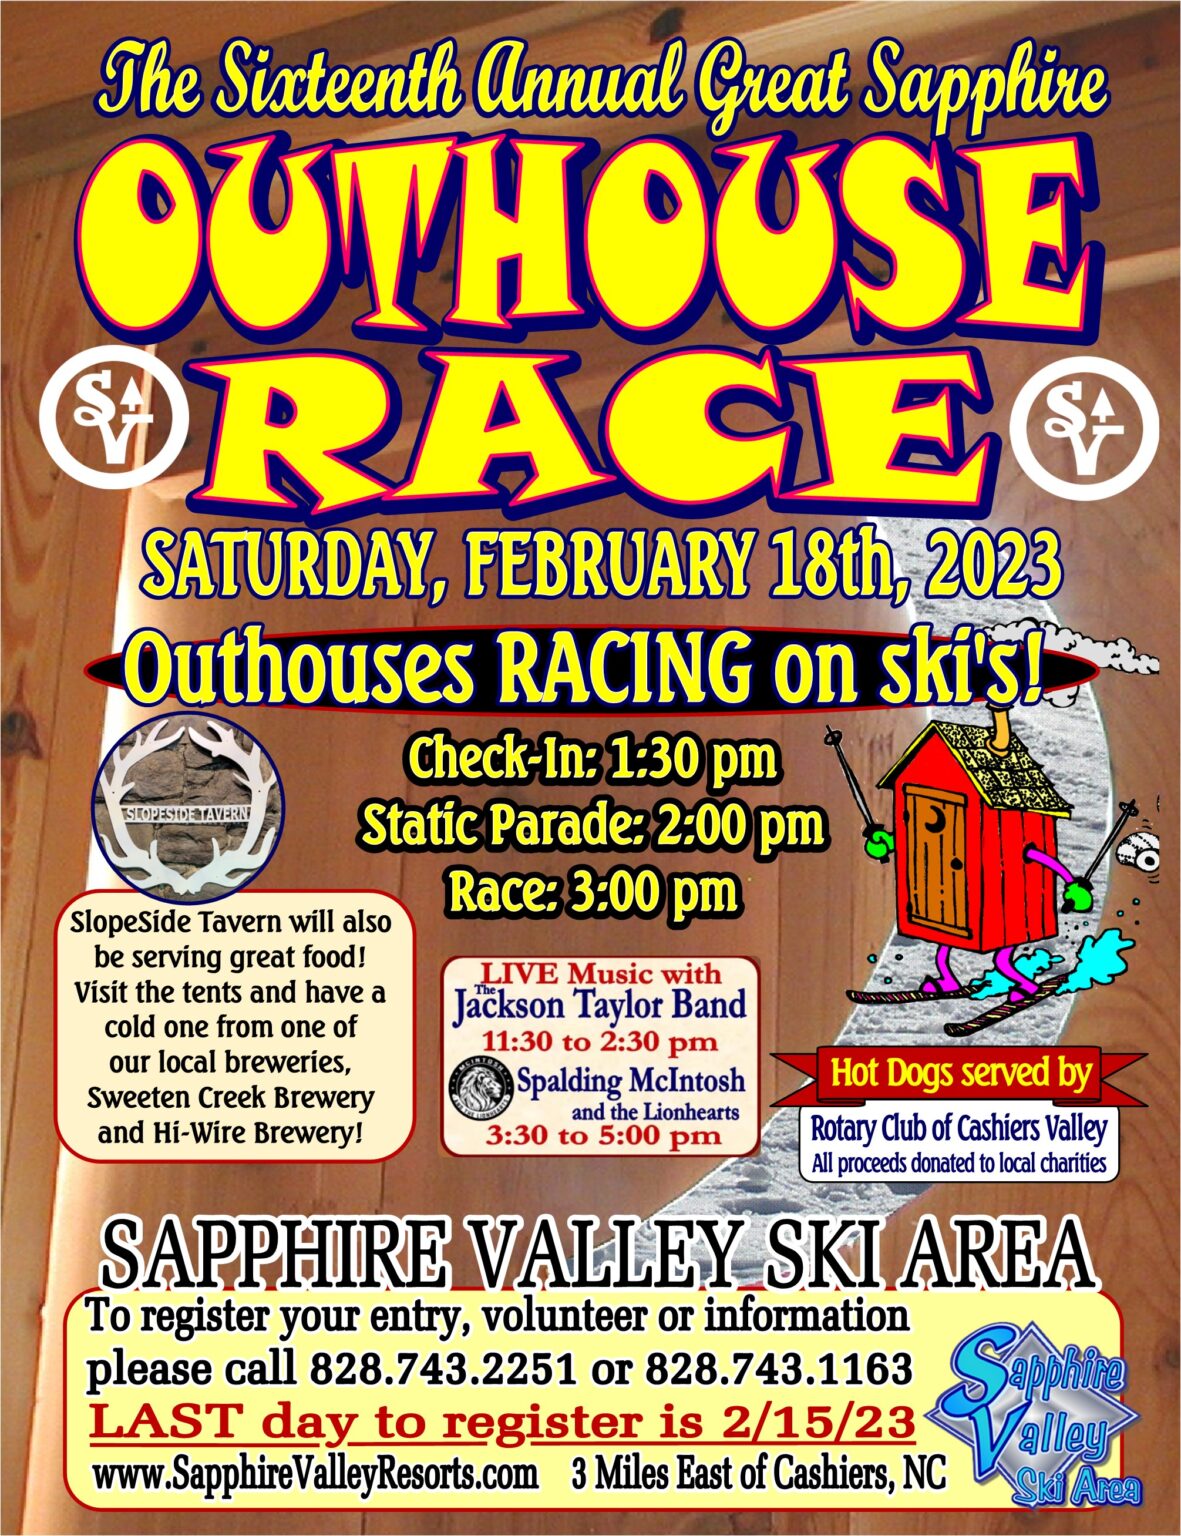 Sixteenth Annual Great Sapphire Outhouse Races Sapphire Valley Resort